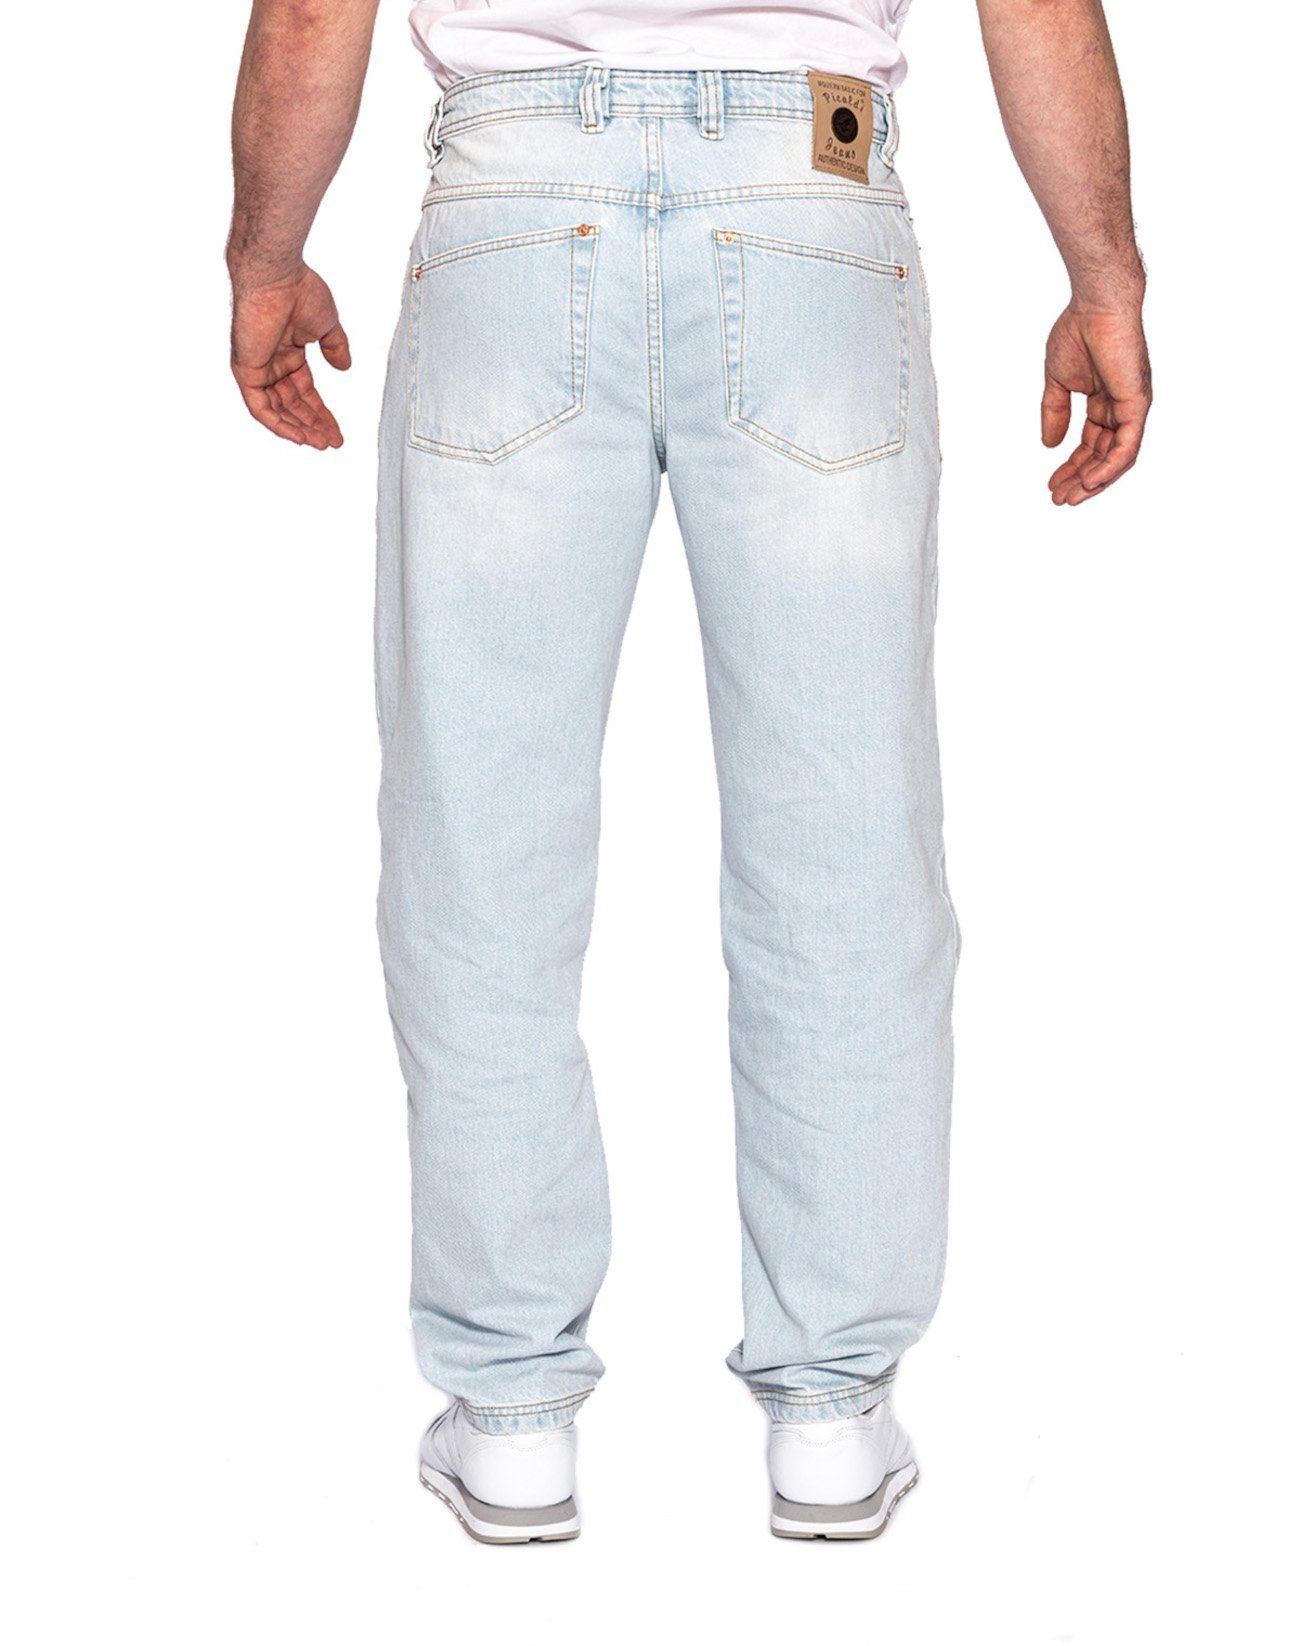 Zicco 472 Torn Fit, PICALDI Weite Jeans Fit Relaxed Loose Jeans